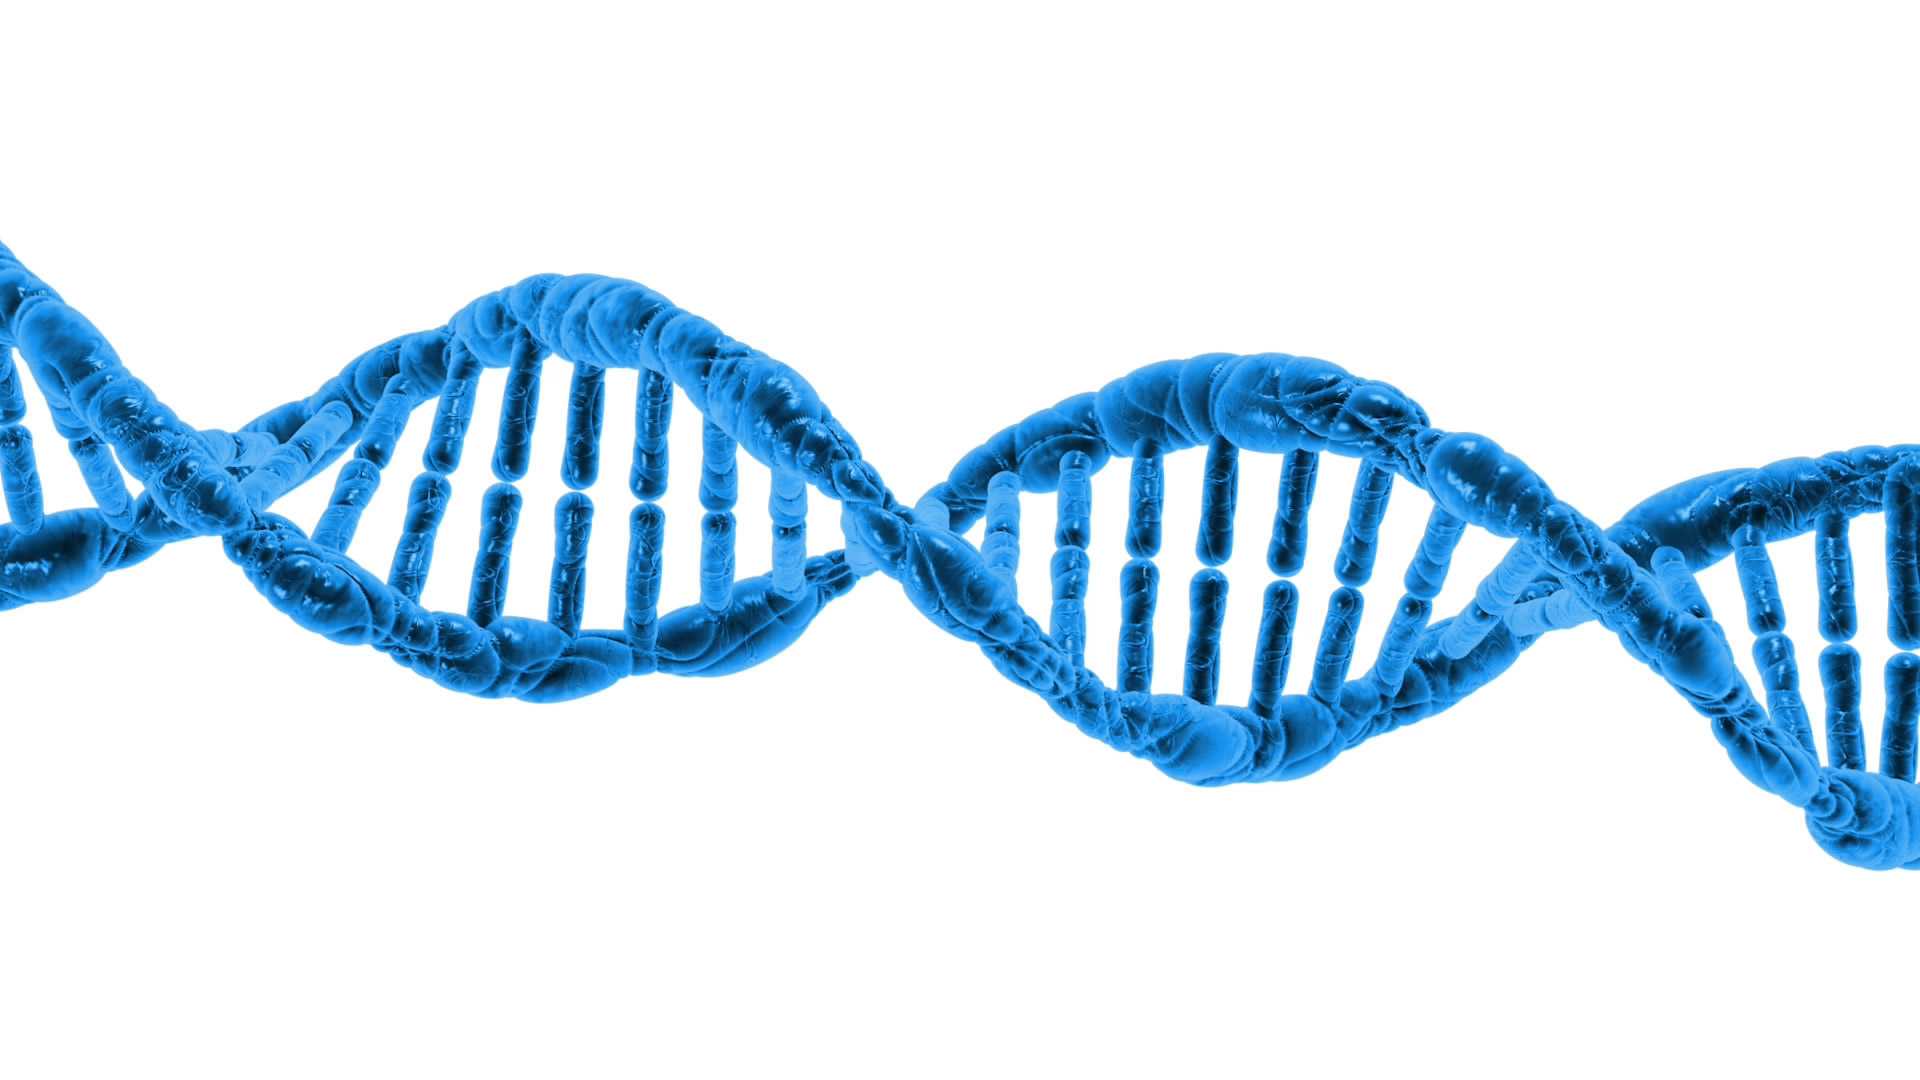 A blue, computer-generated rendering of a DNA strand.